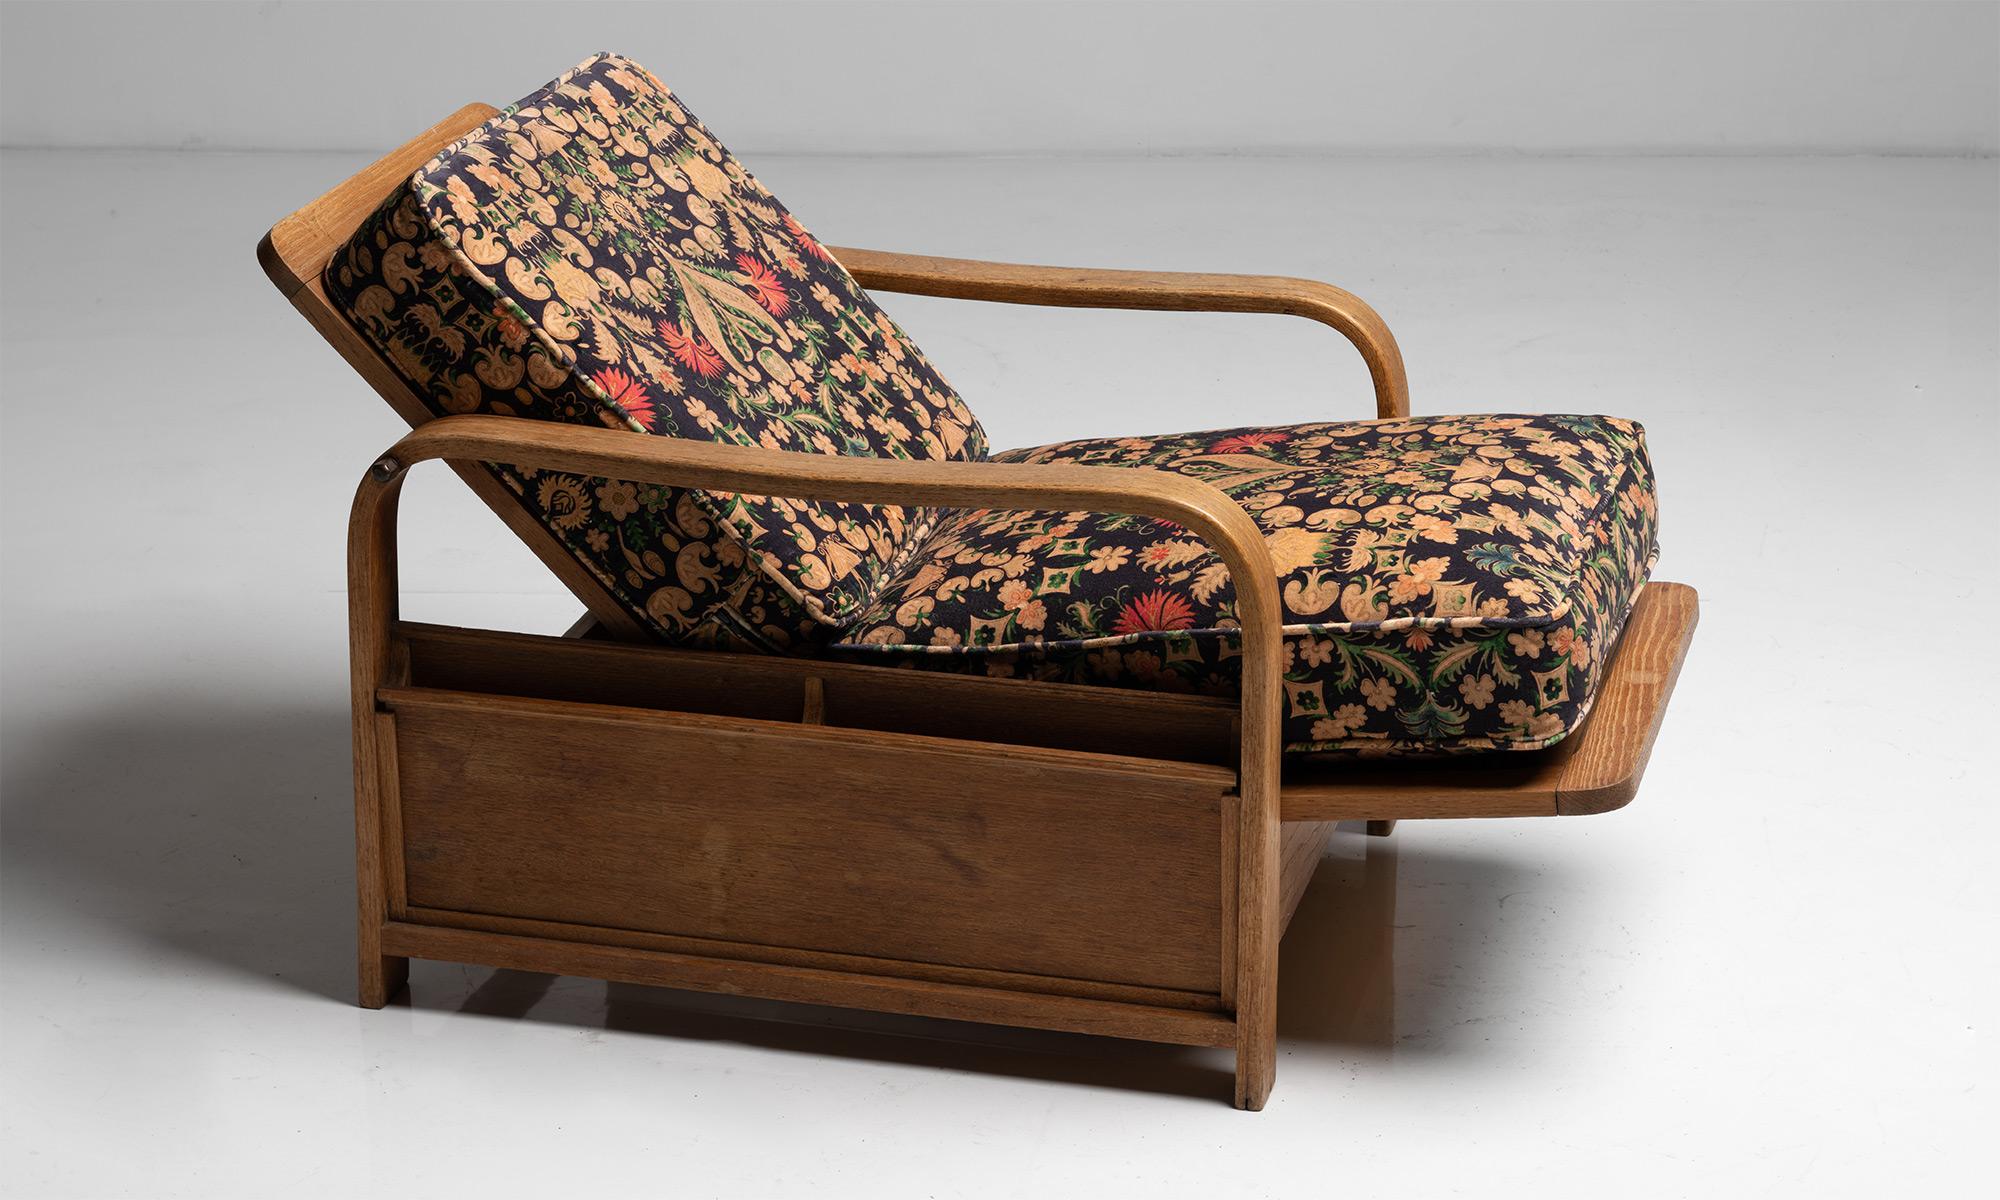 Heals of London oak reading chair in artio velvet by House of Hackney

England Circa 1920

Newly upholstered, with reclining backrest and magazine racks on each side.

Measures: 24.5”L x 33”D / 46”D extended x 30.75”H x 17.5”seat.